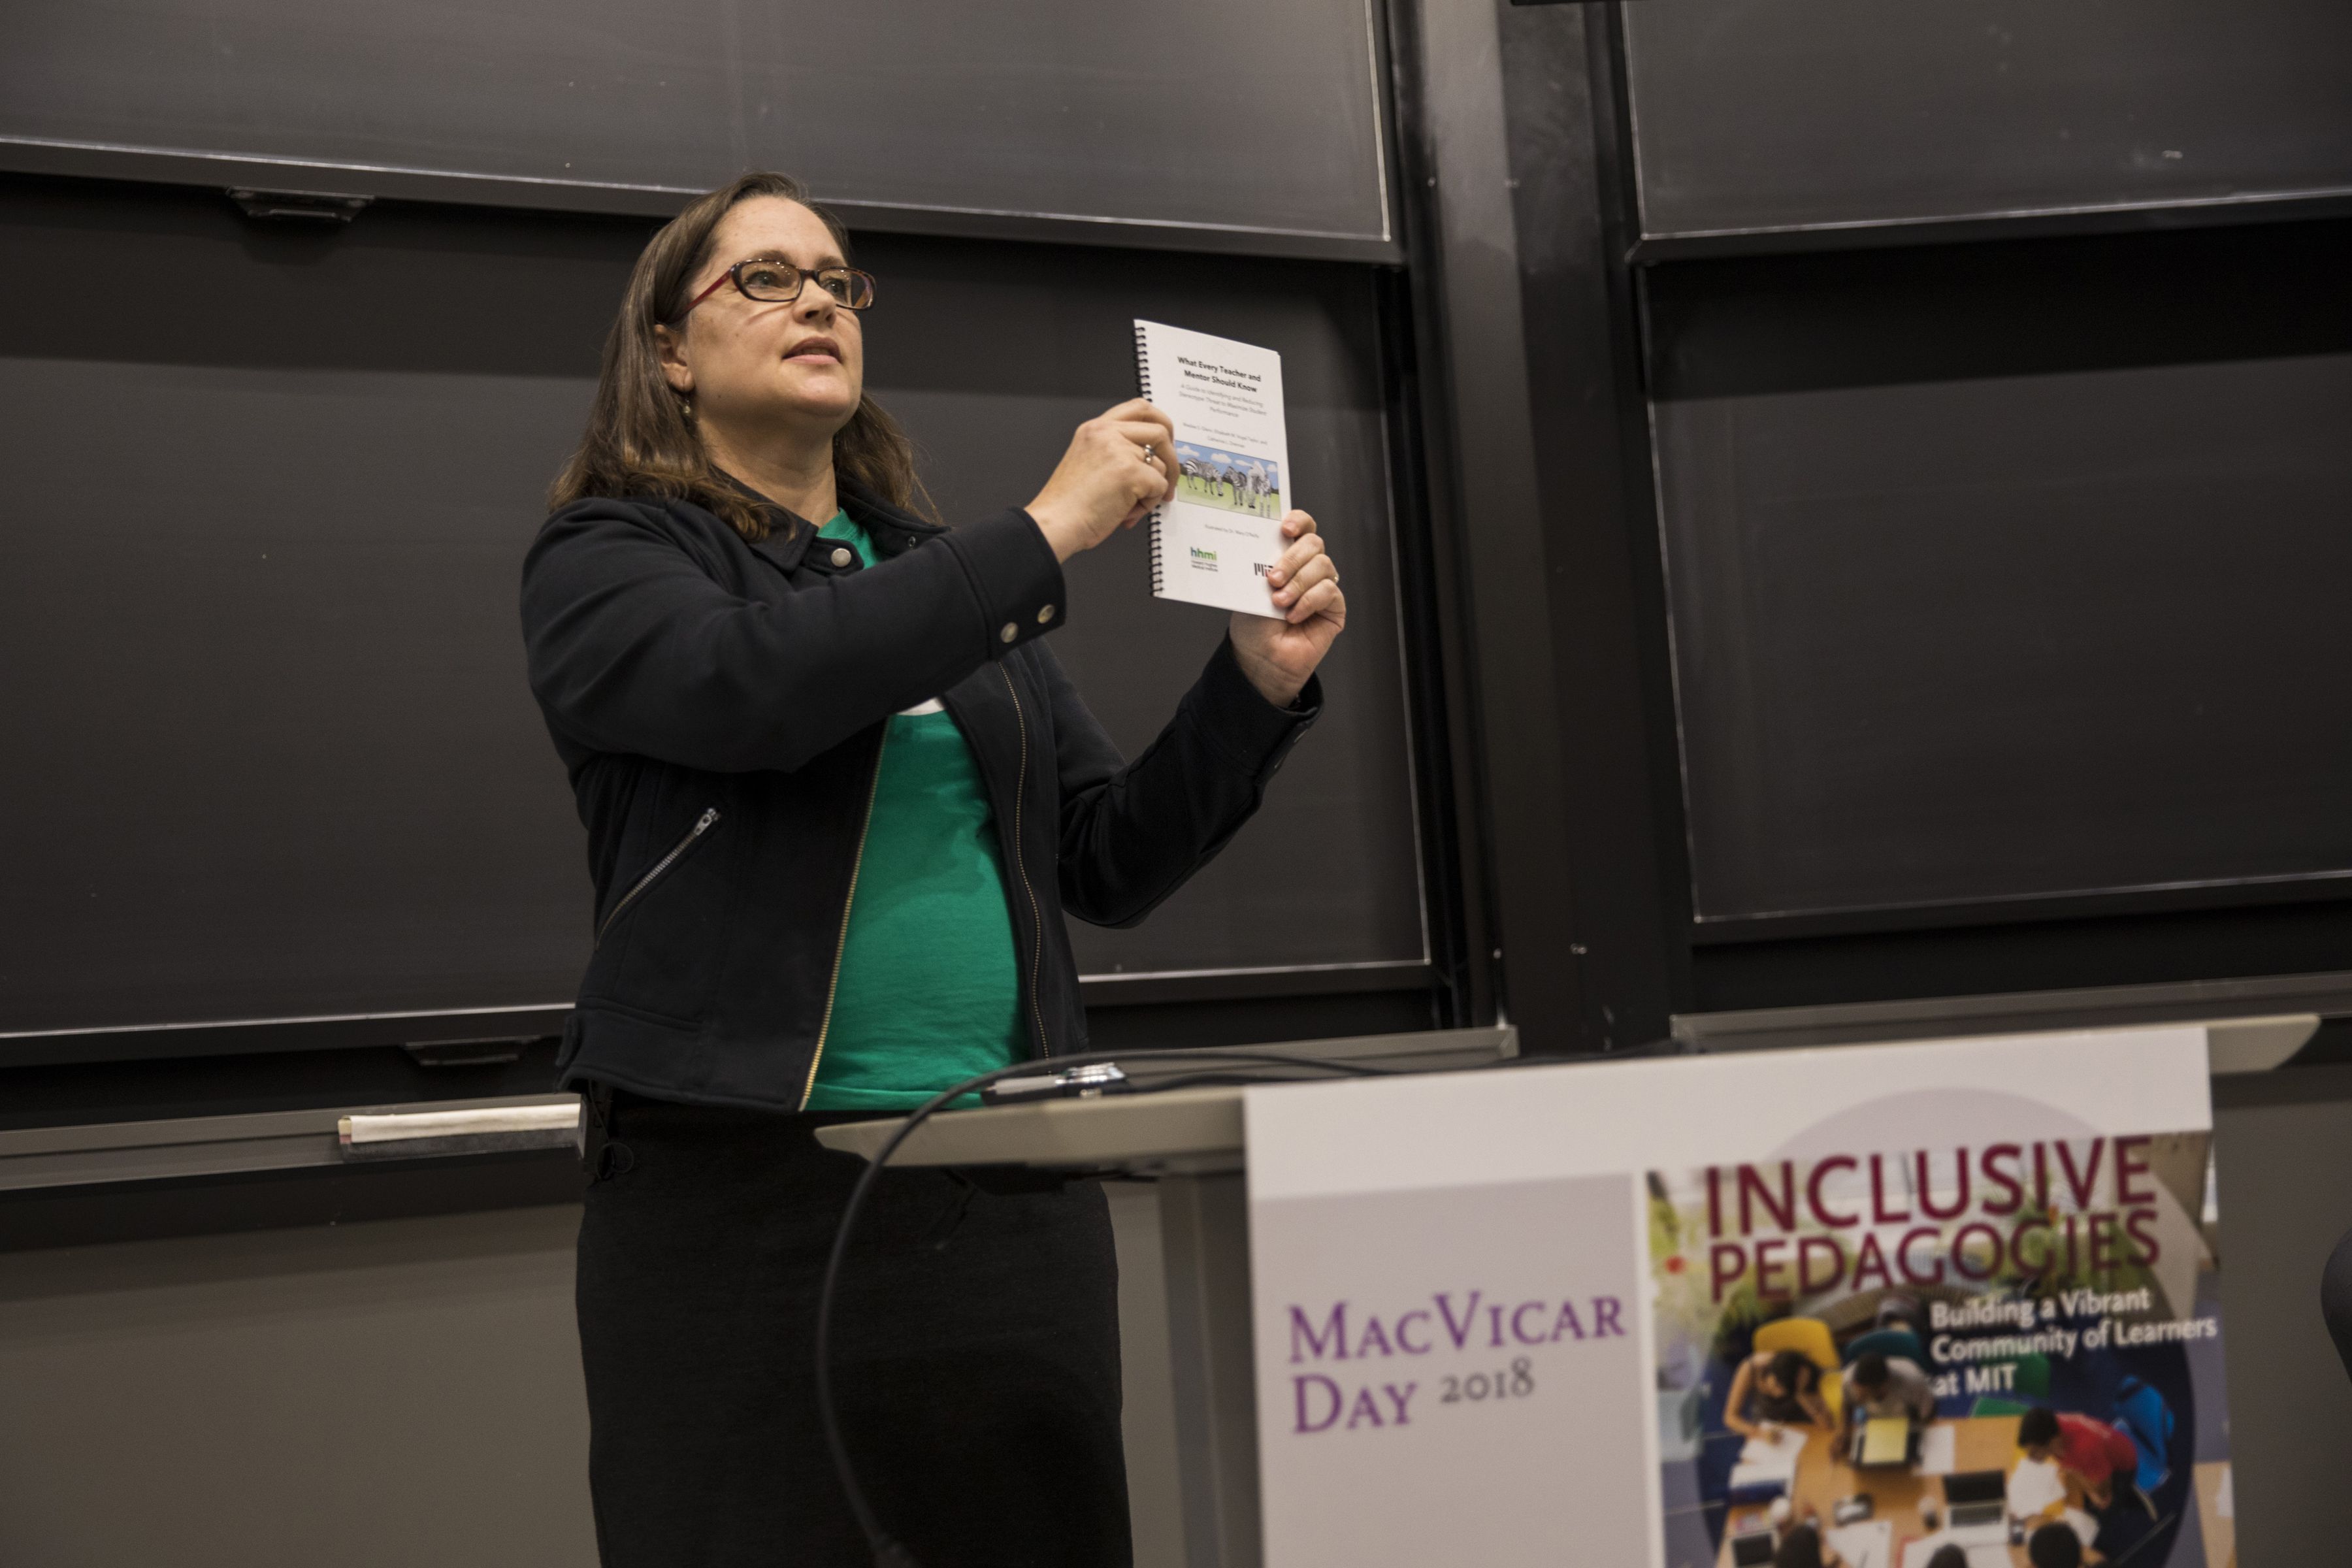 Professor Catherine Drennan presents a booklet at MacVicar Day Event.